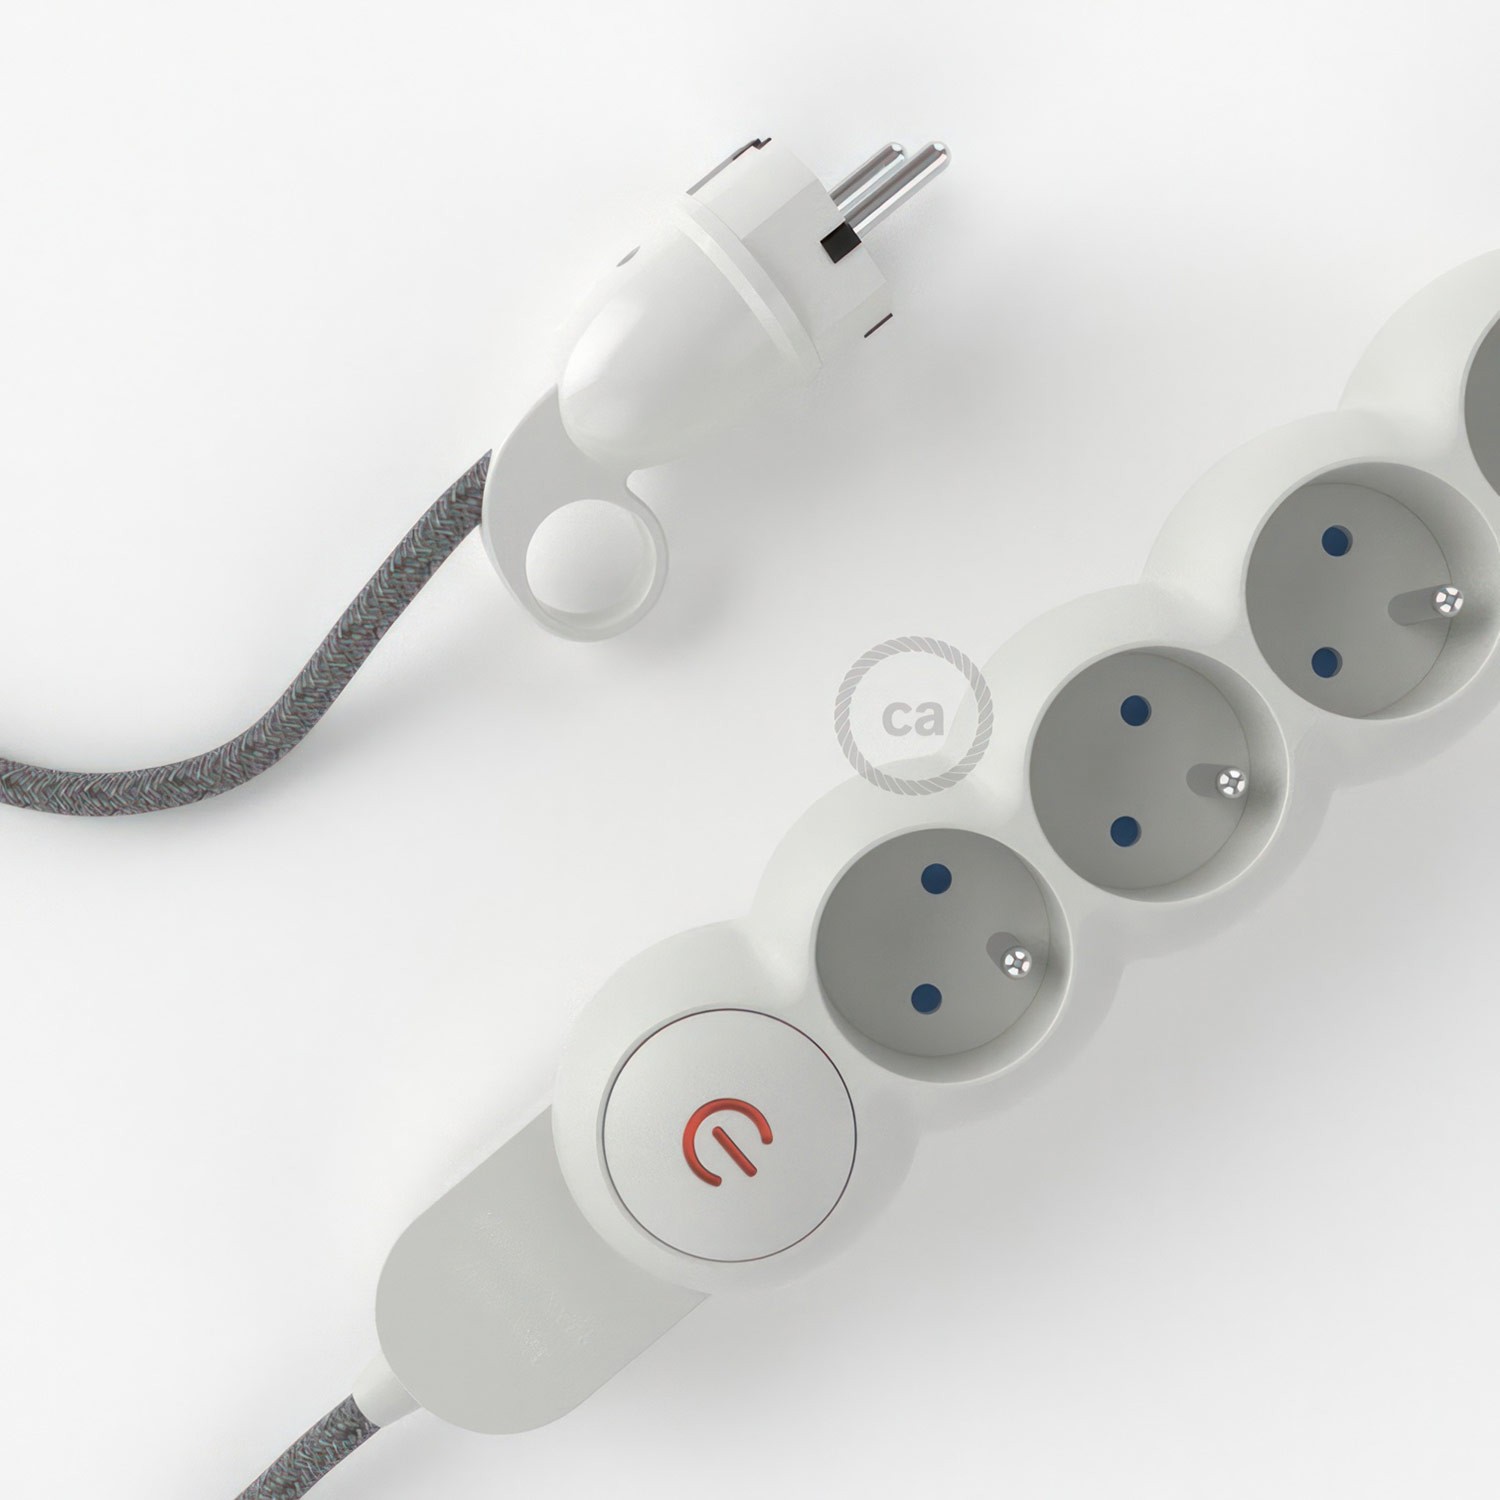 French Power Strip with electrical cable covered in Grey Natural Linen fabric RN02 and Schuko plug with confort ring